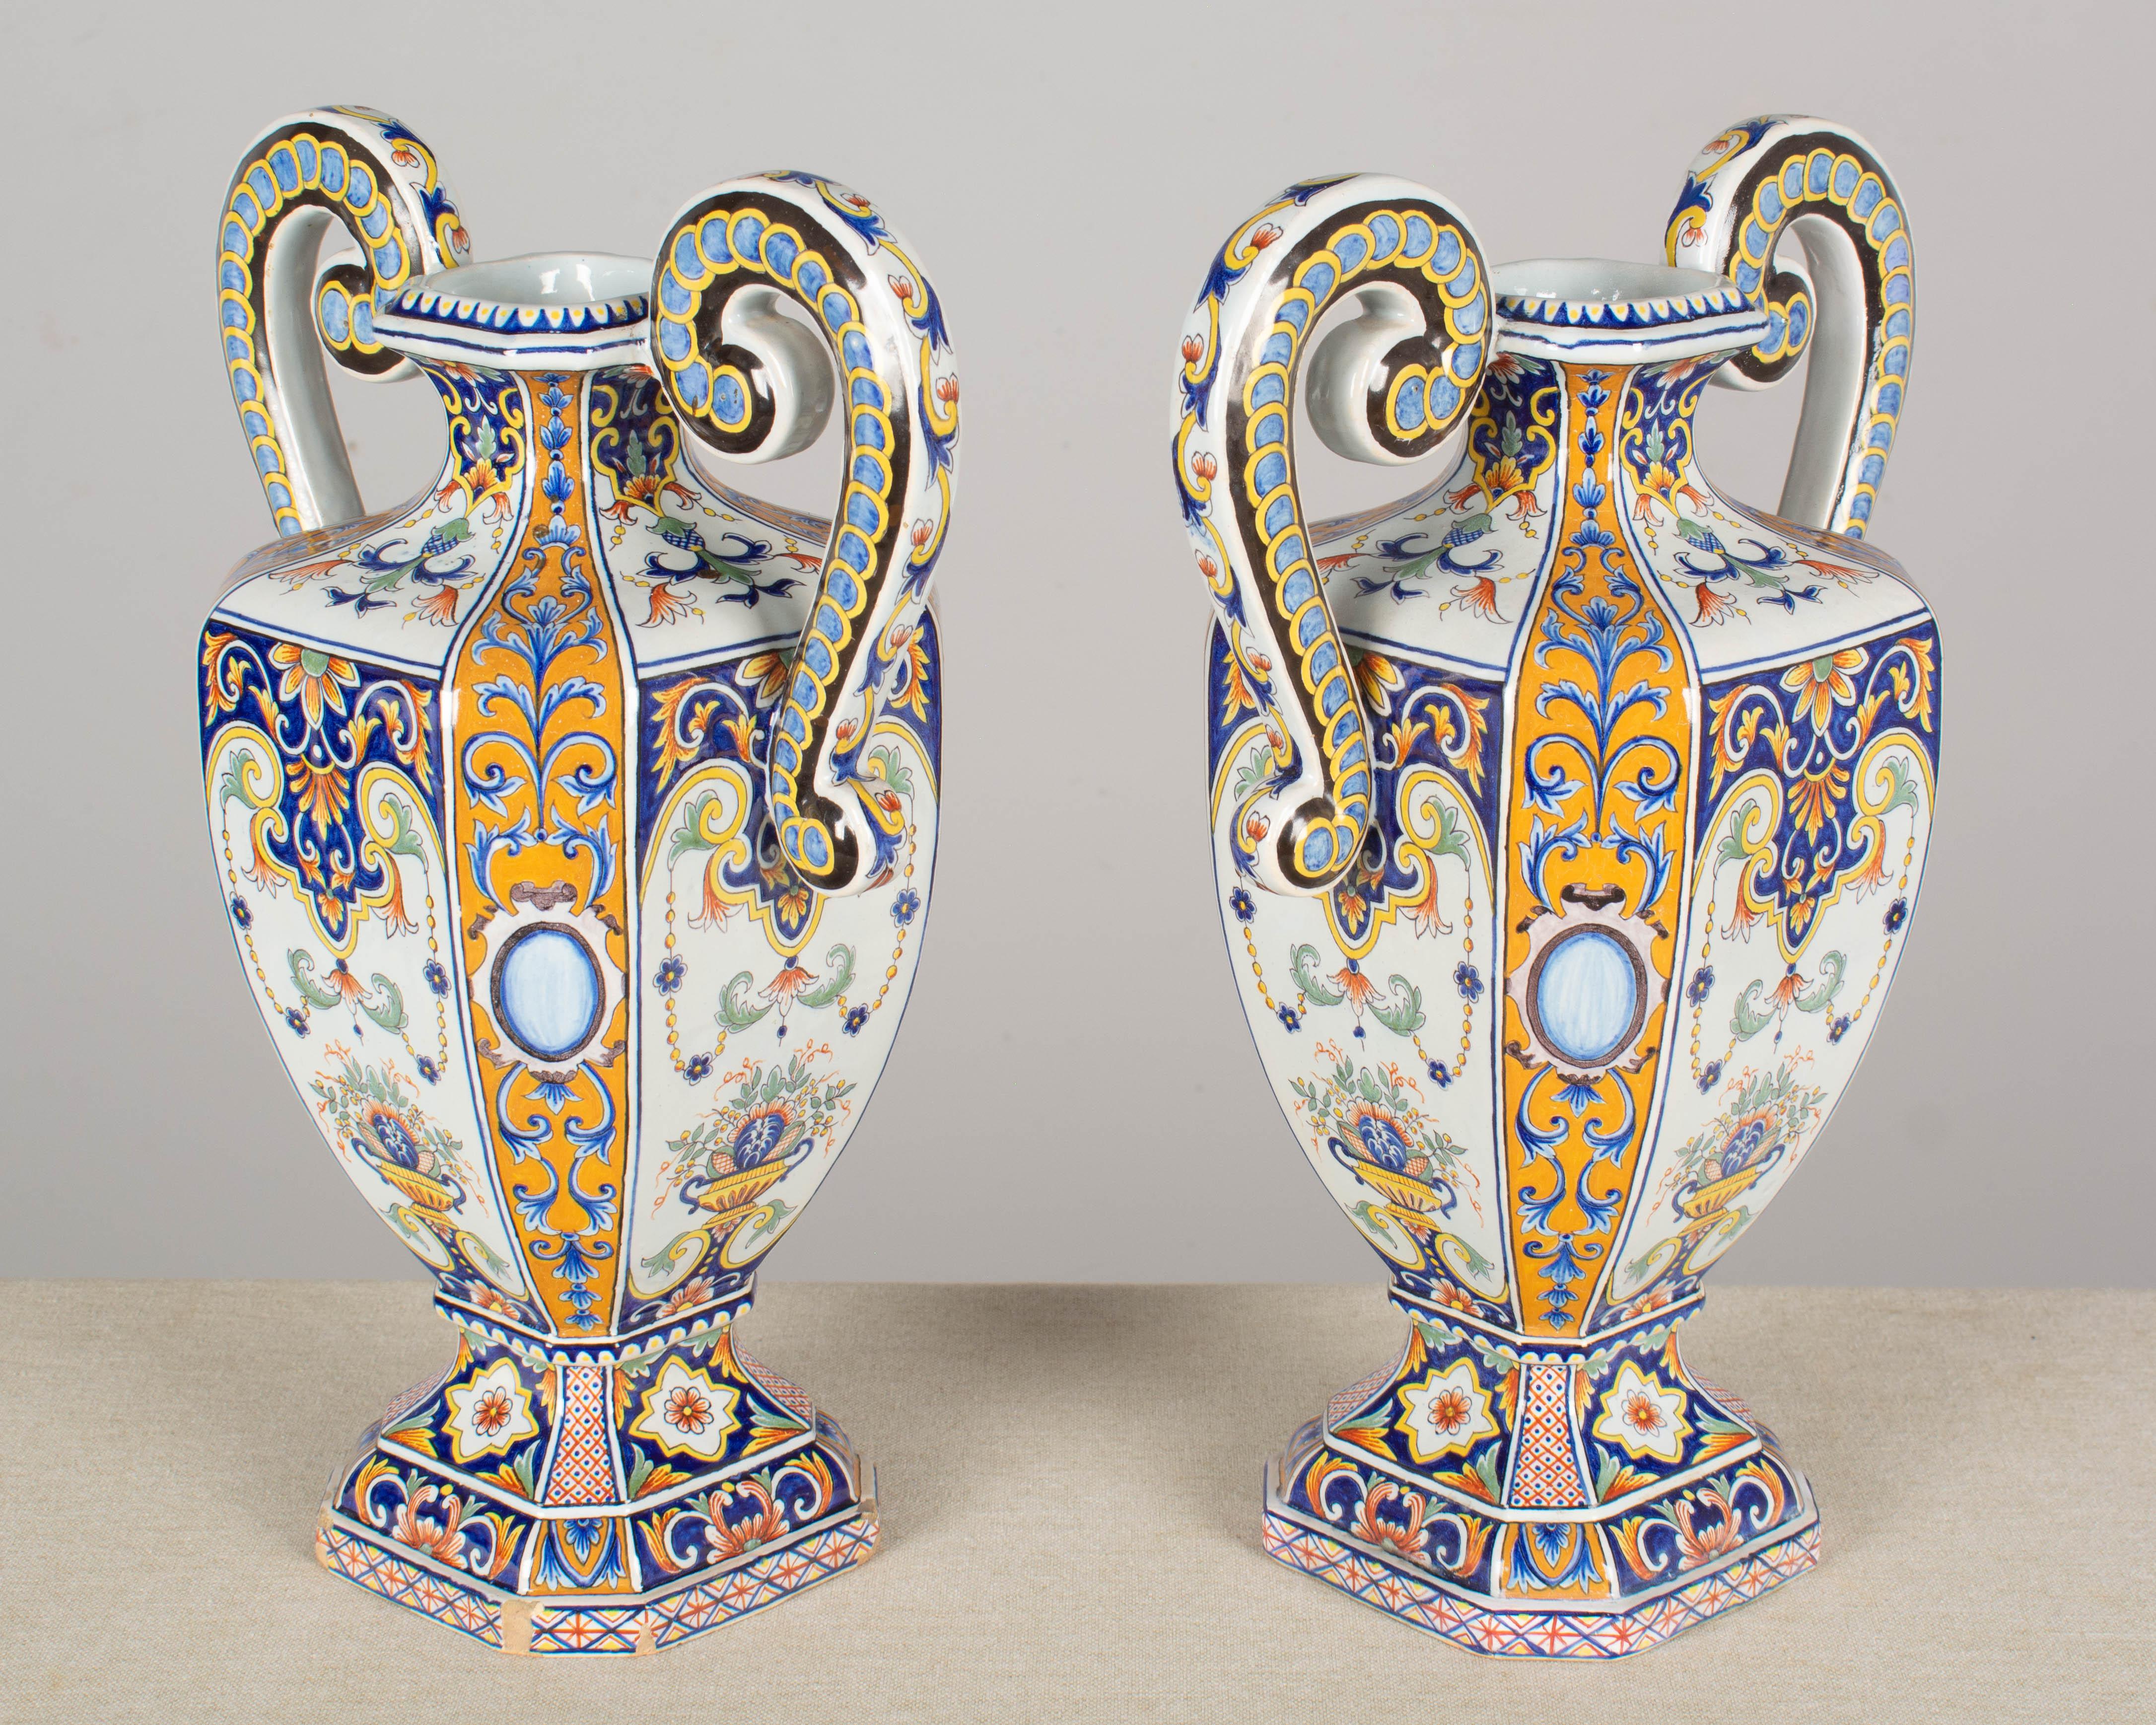 19th Century French Desvres Faience Urn Form Vases, a Pair For Sale 3